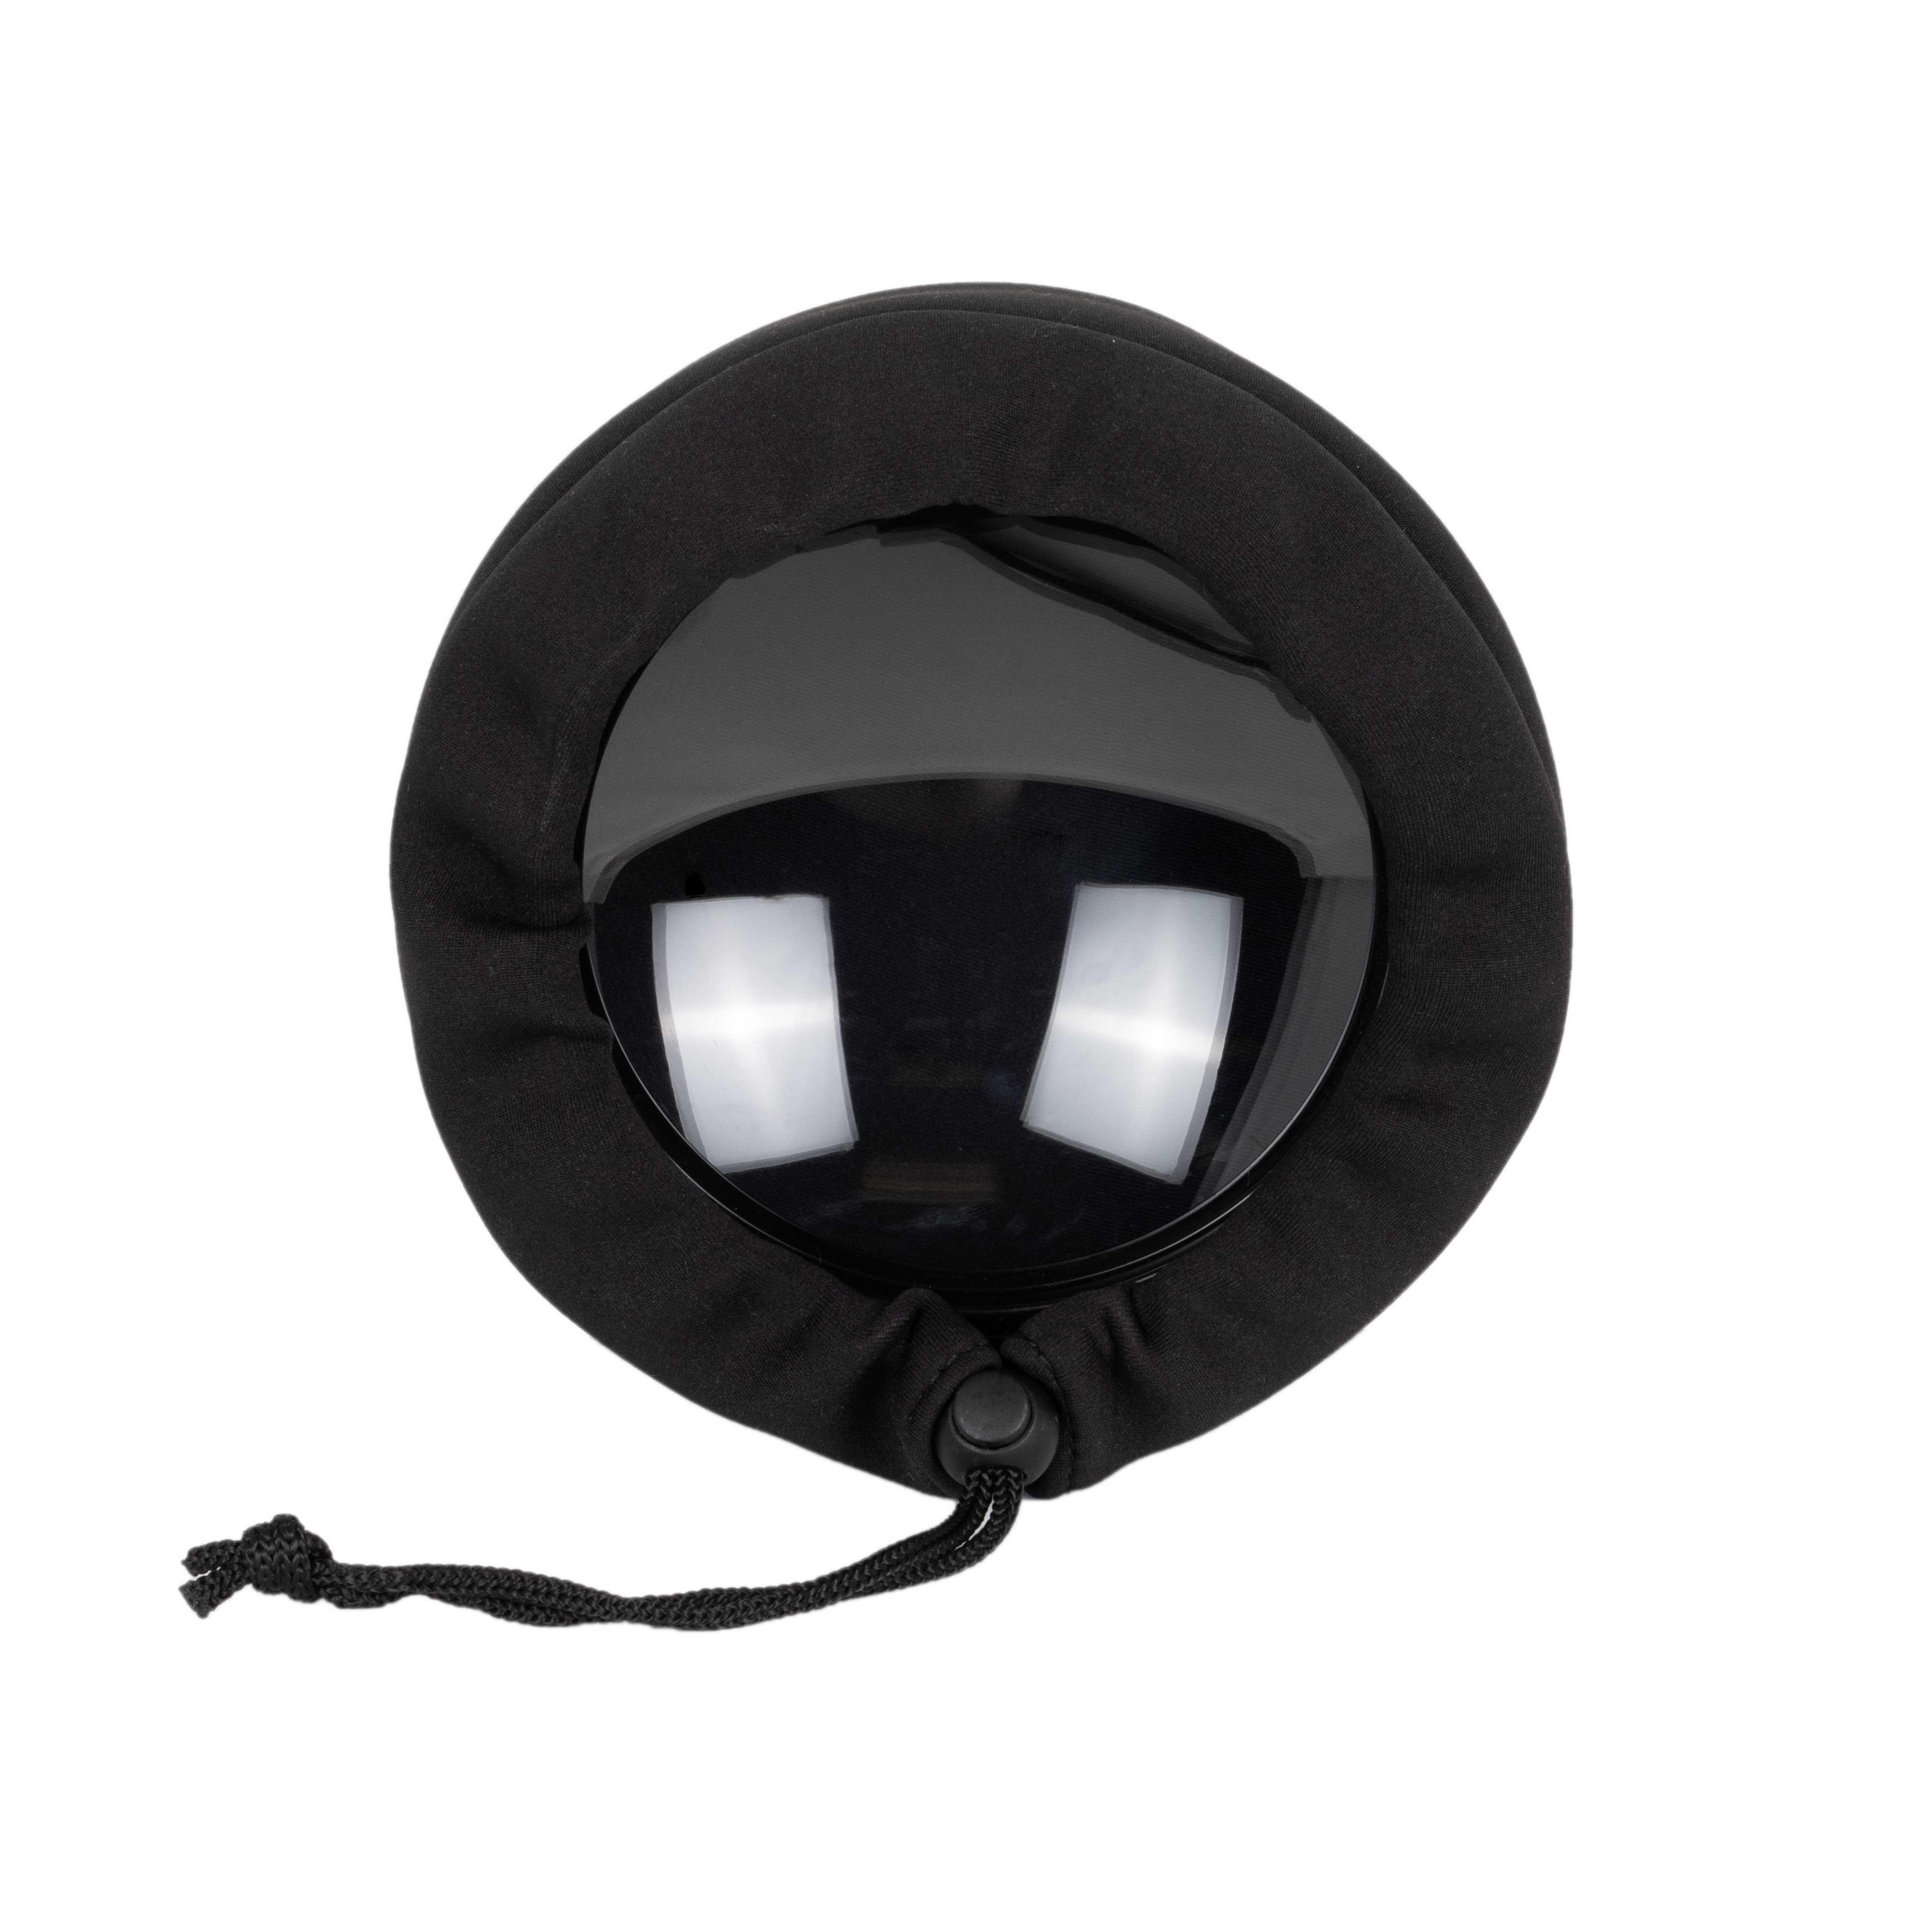 Neoprene Cover for DL Compact 8-inch Dome Port